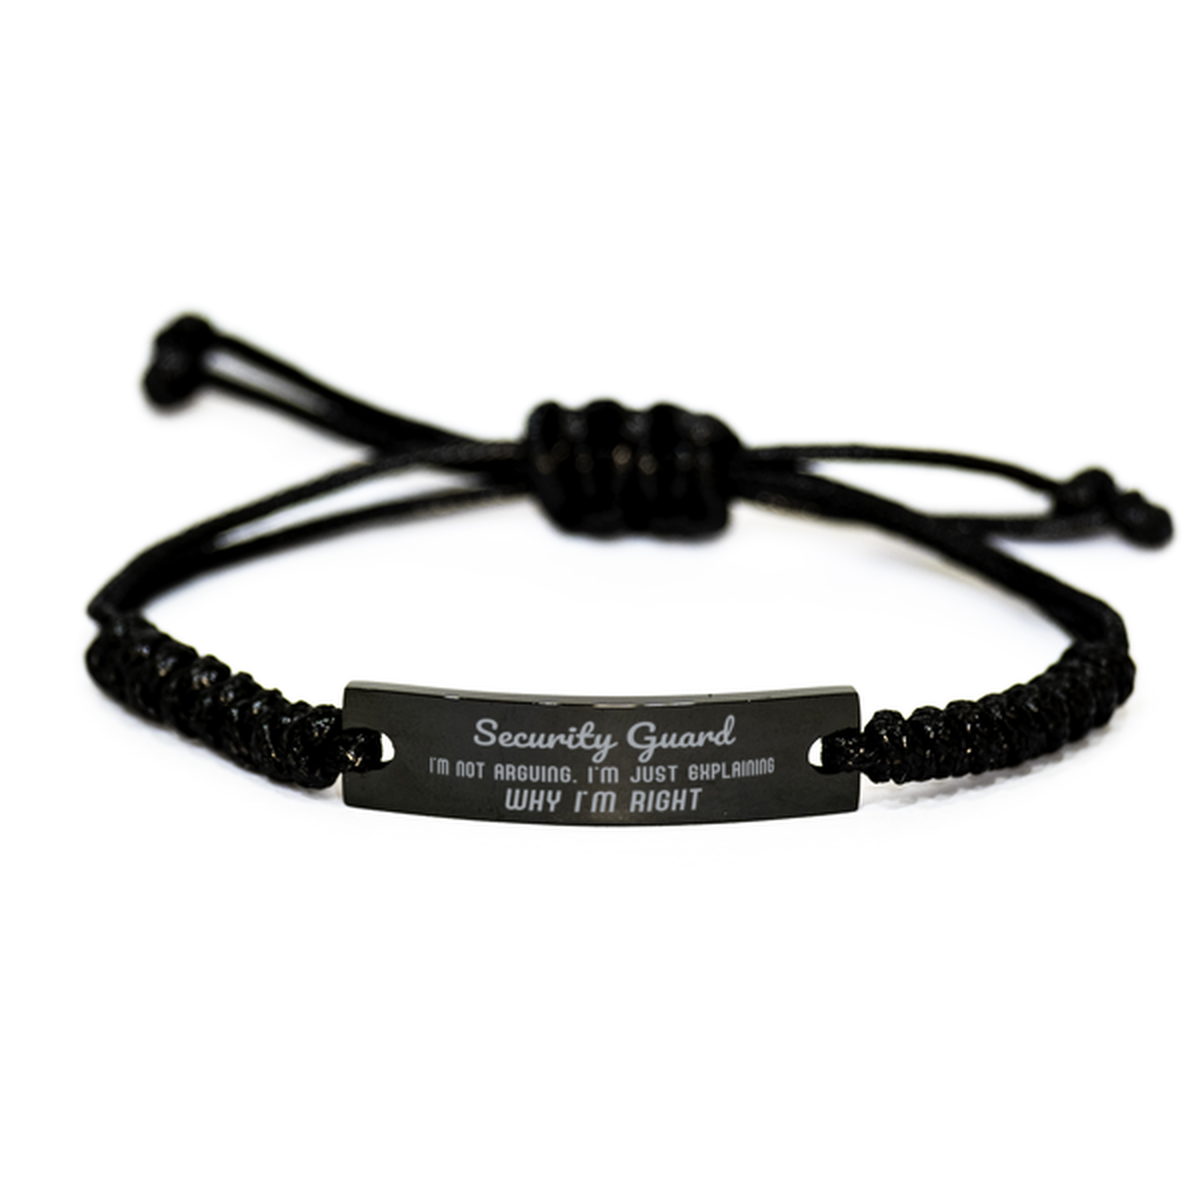 Security Guard I'm not Arguing. I'm Just Explaining Why I'm RIGHT Black Rope Bracelet, Funny Saying Quote Security Guard Gifts For Security Guard Graduation Birthday Christmas Gifts for Men Women Coworker